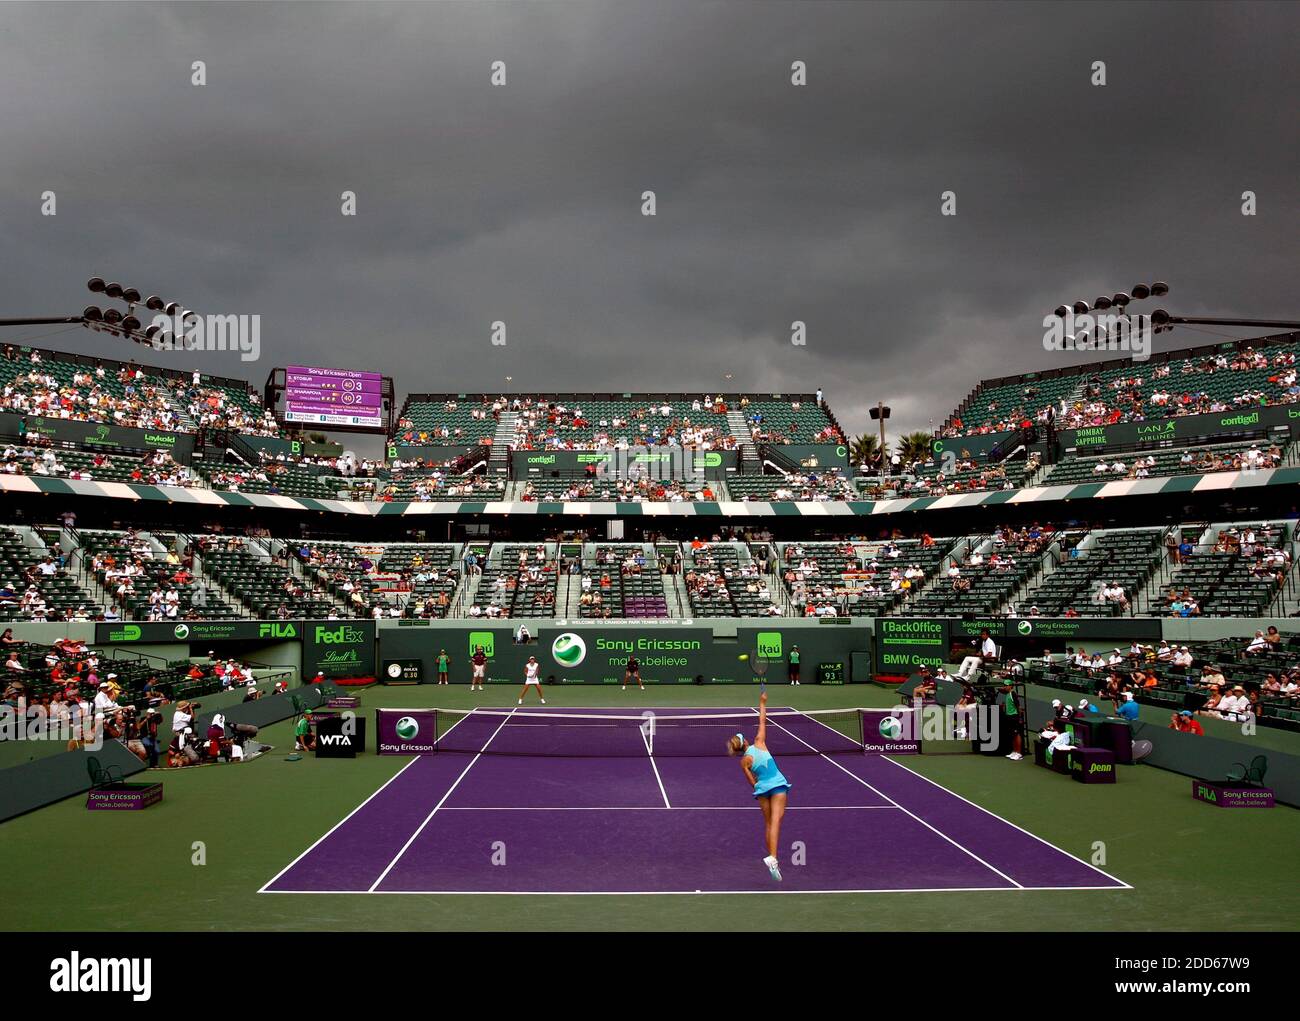 NO FILM, NO VIDEO, NO TV, NO DOCUMENTARY - Heavy storm clouds hover over  the Tennis Center as Maria Sharapova of Russia serves to Samantha Stosur of  Australia during the Sony Ericsson